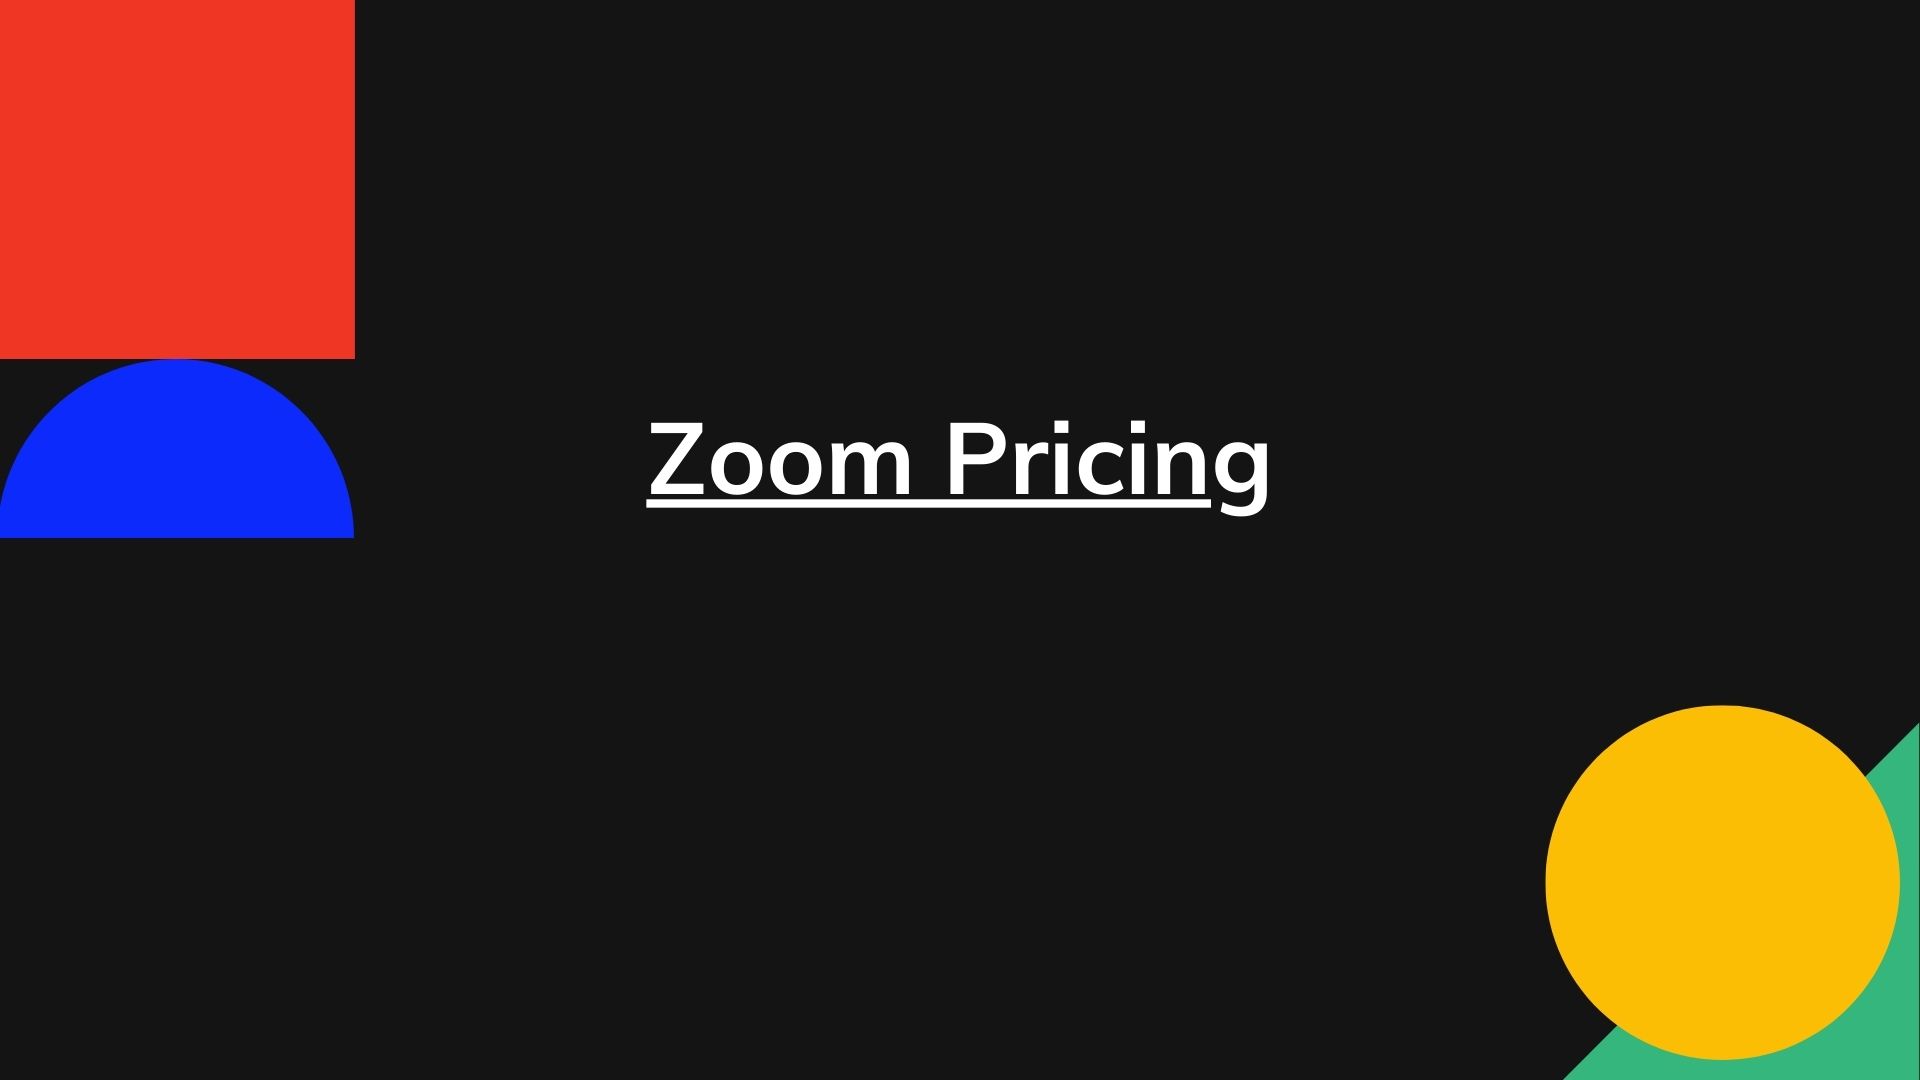 Zoom Pricing- Actual Pricing For All Plans, Enterprise Too!